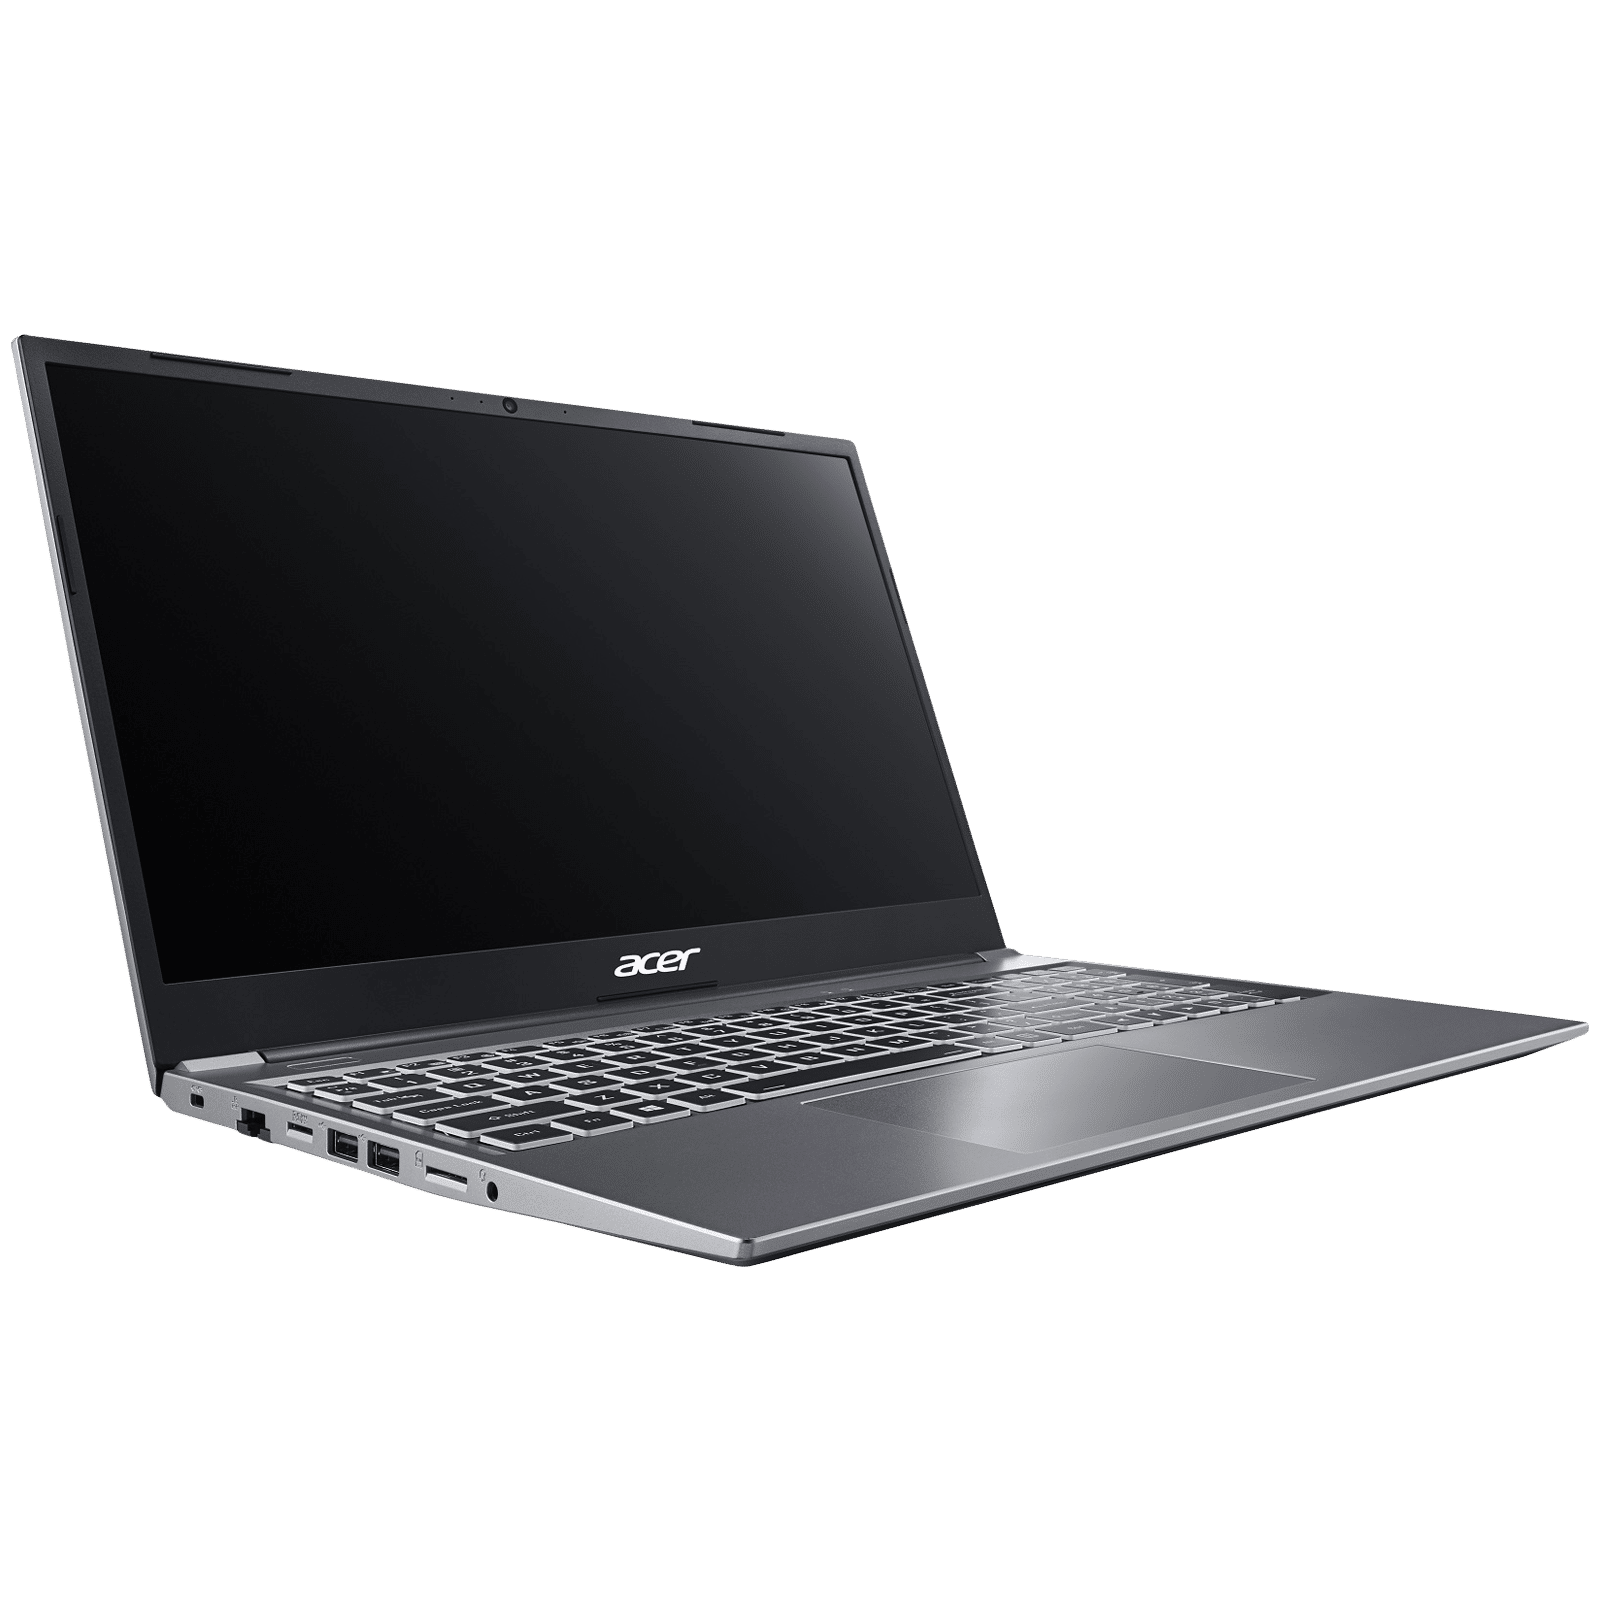 Acer Aspire 5 launched in India with 12th Gen Intel Core i5